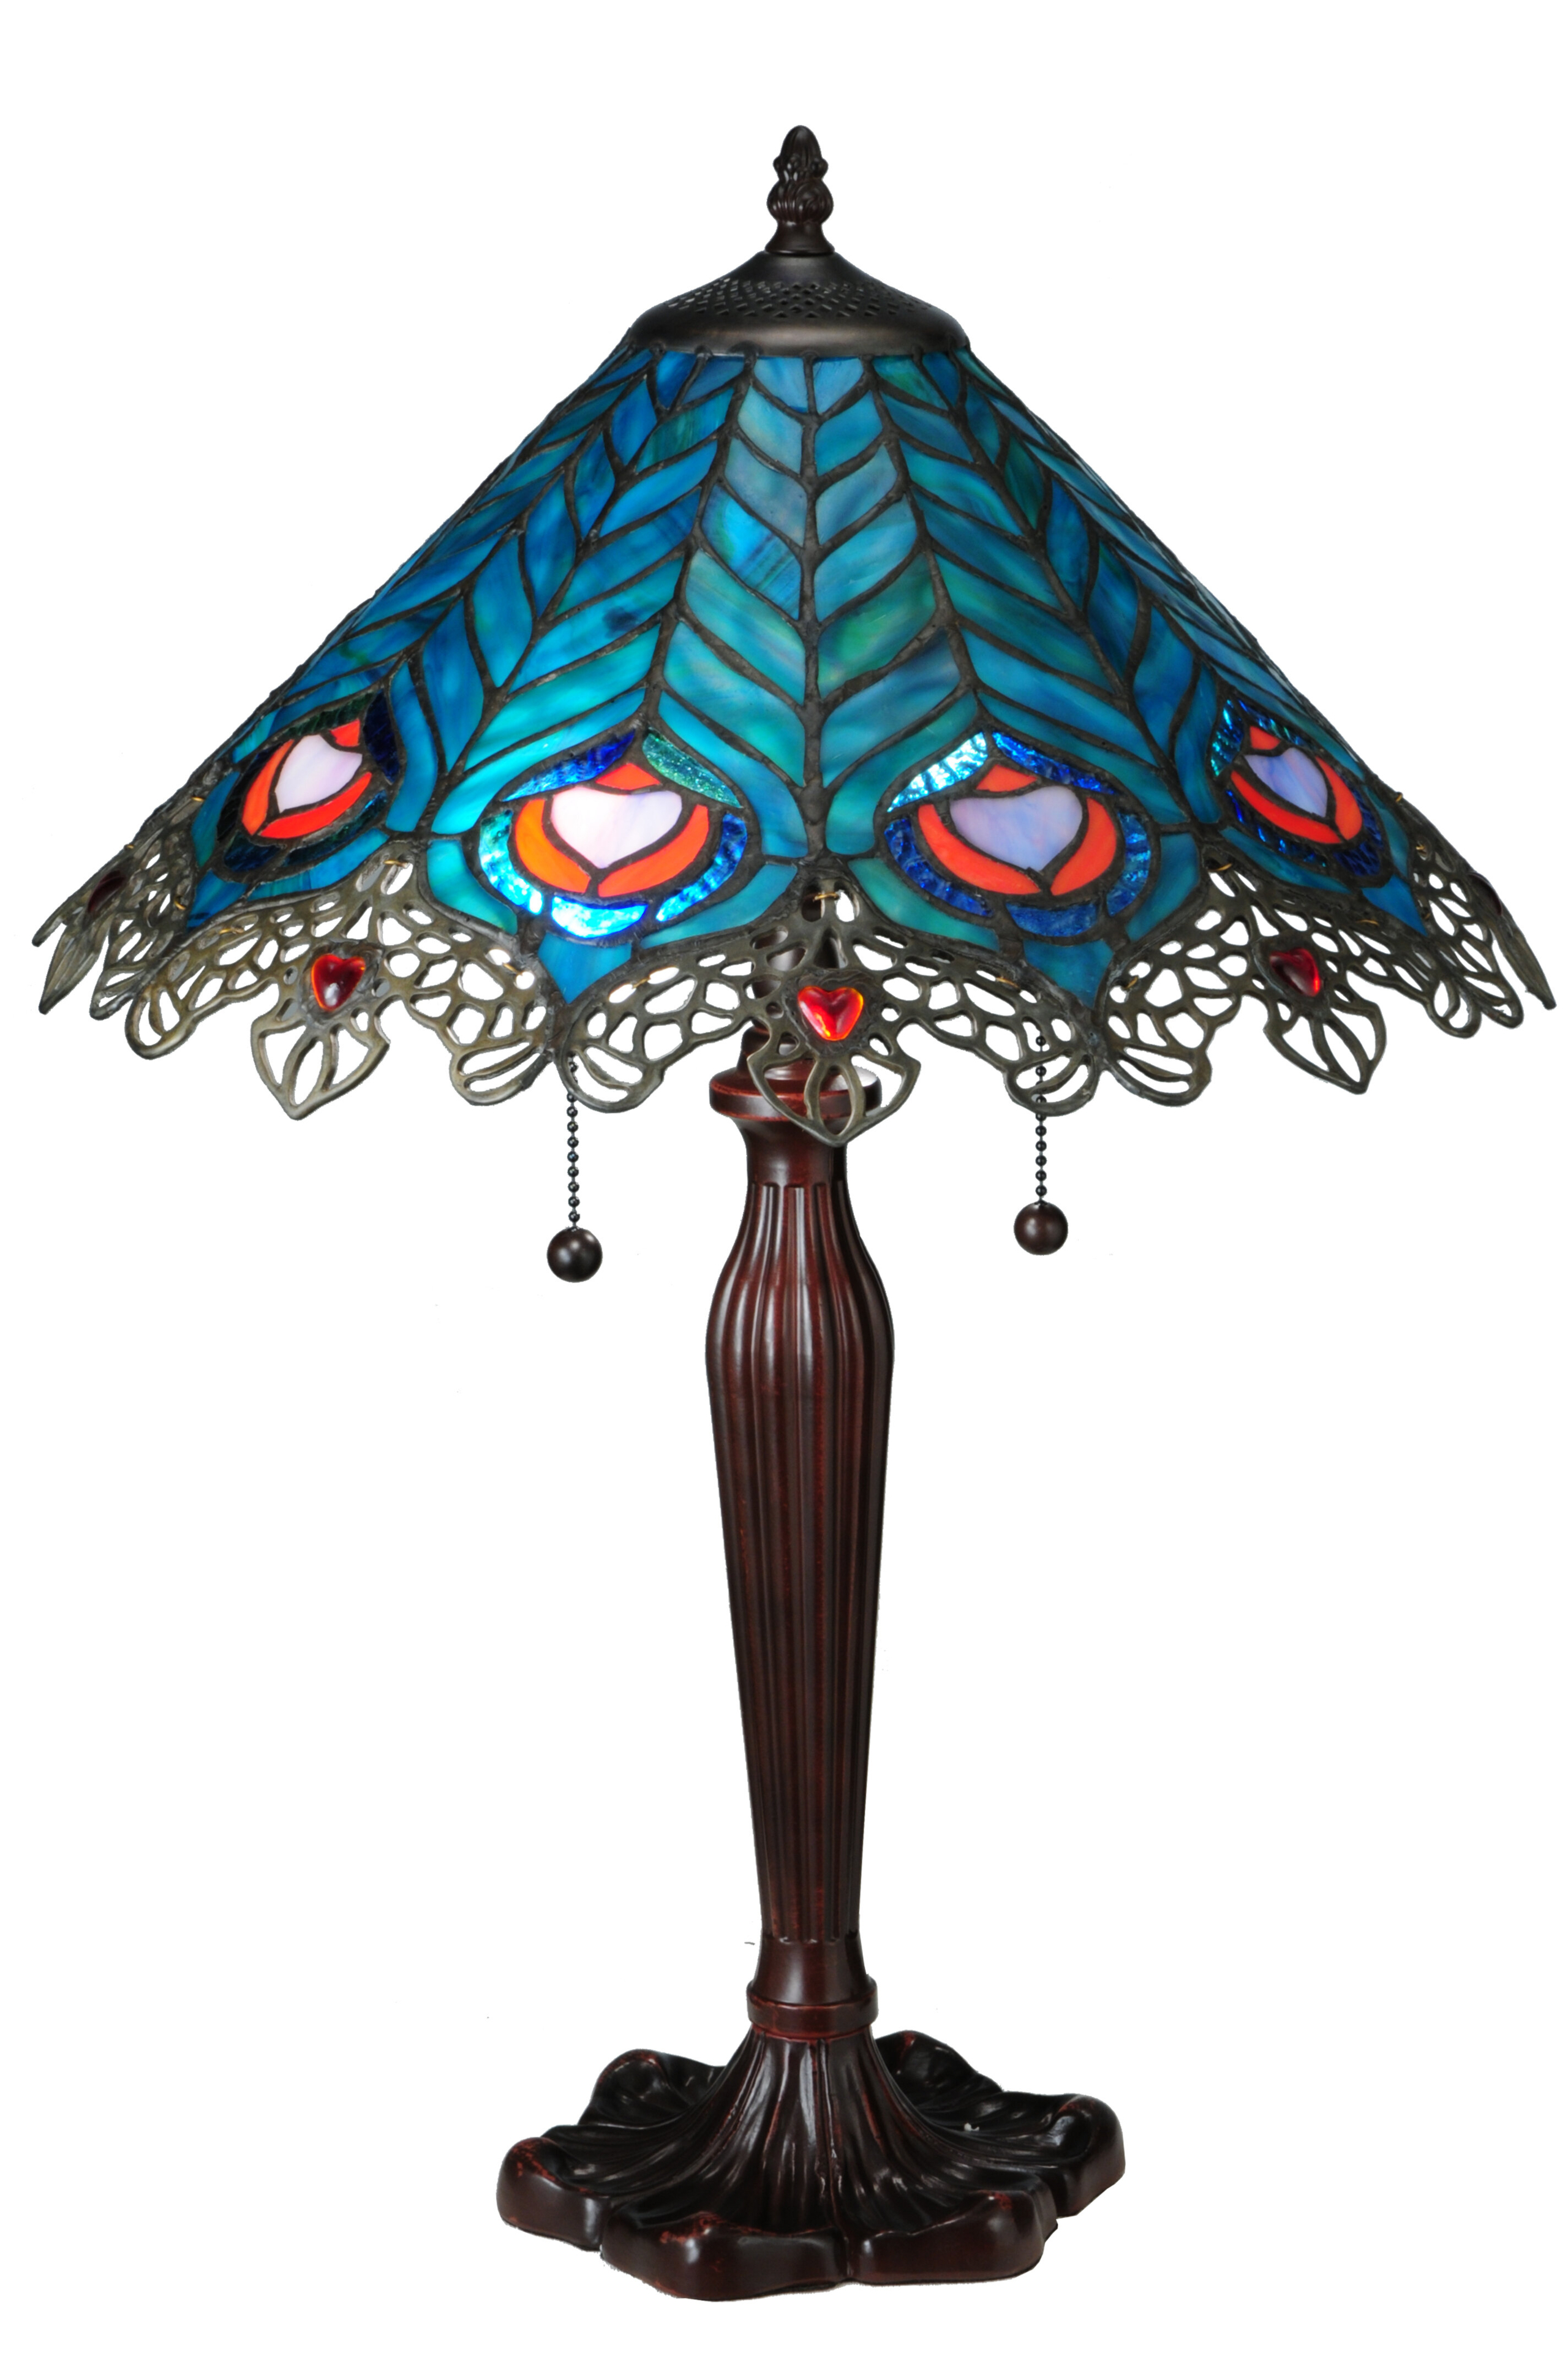 Stained Glass Peacock Lamp | peacecommission.kdsg.gov.ng